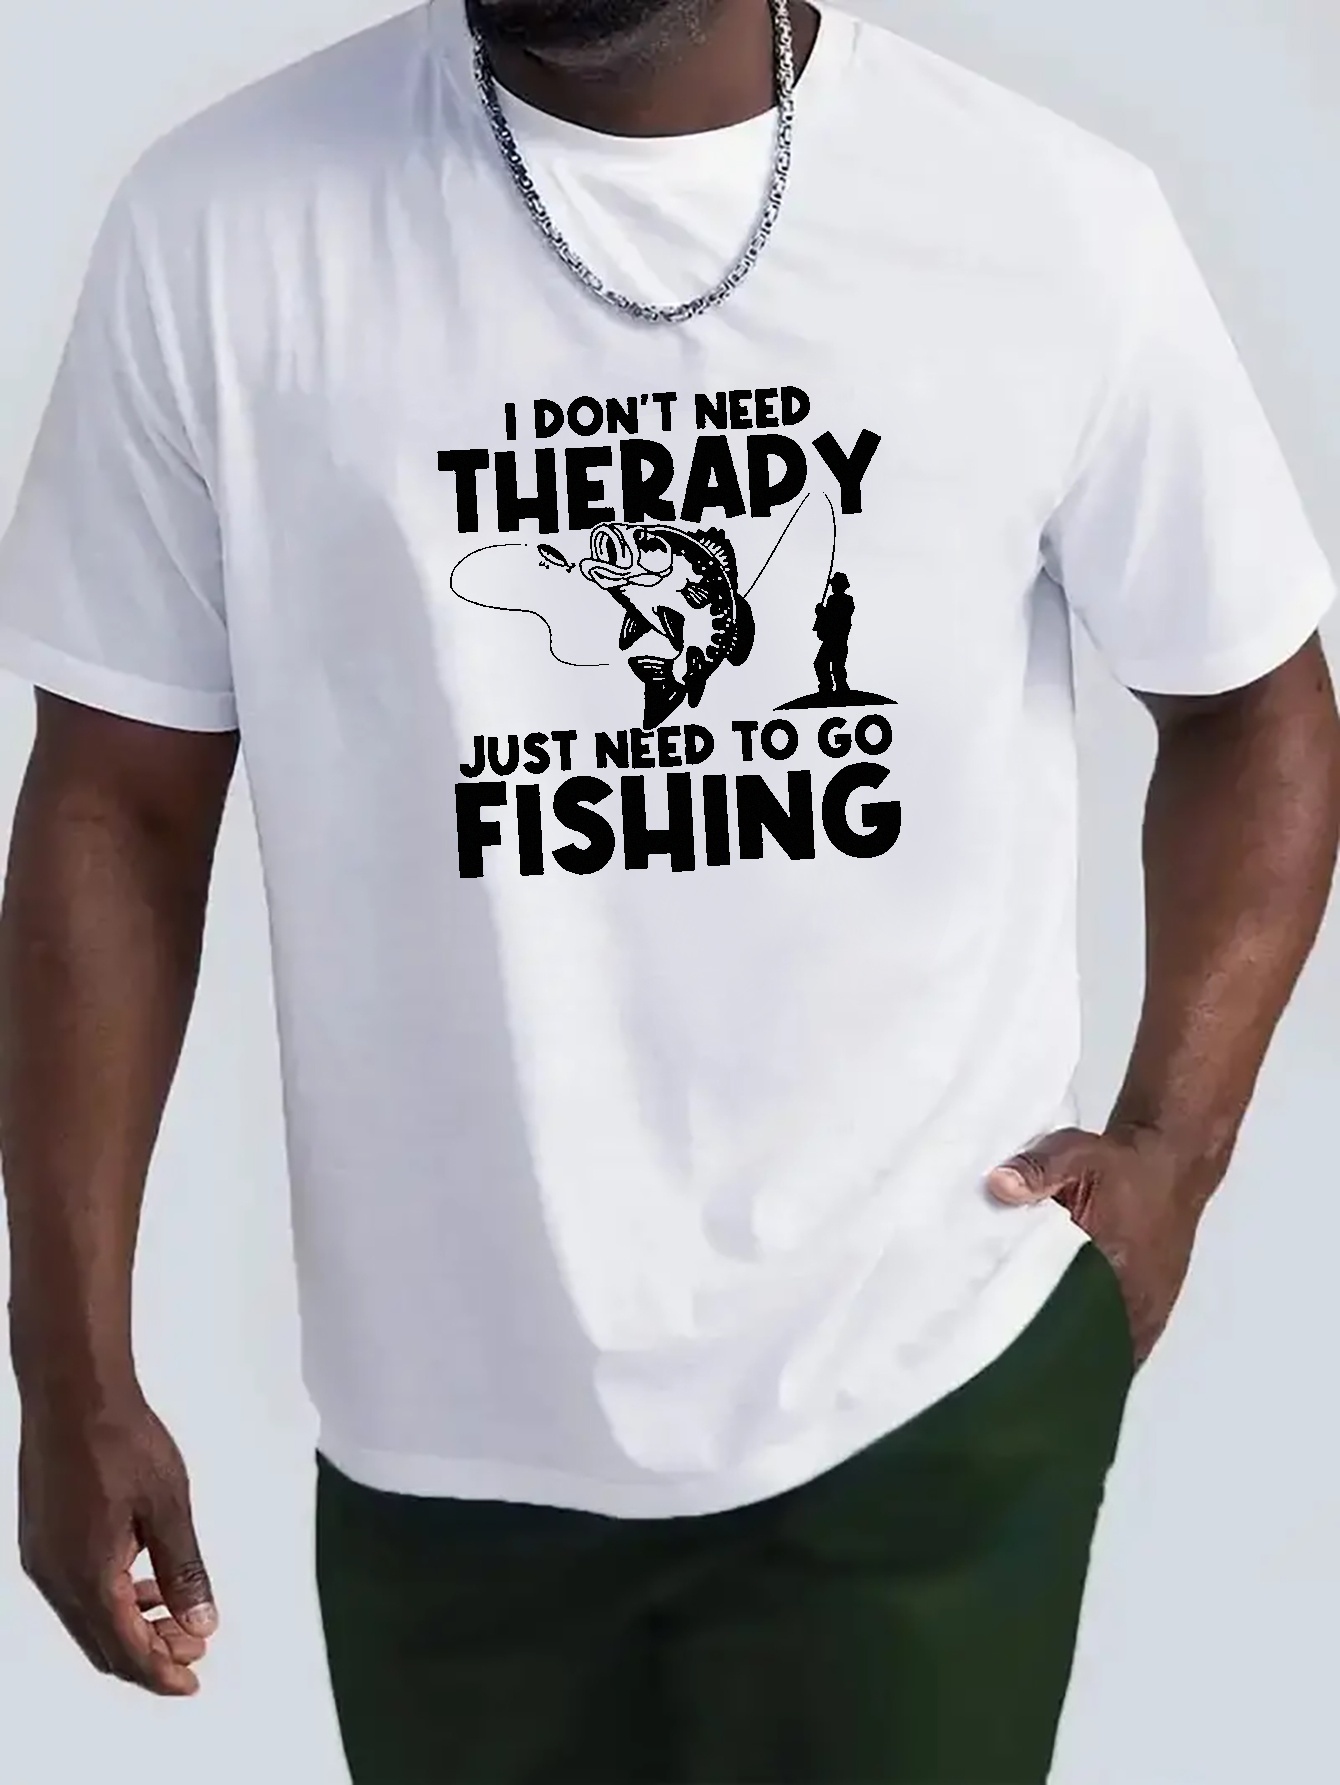 Need to go Fishing - I don't need therapy' Men's T-Shirt